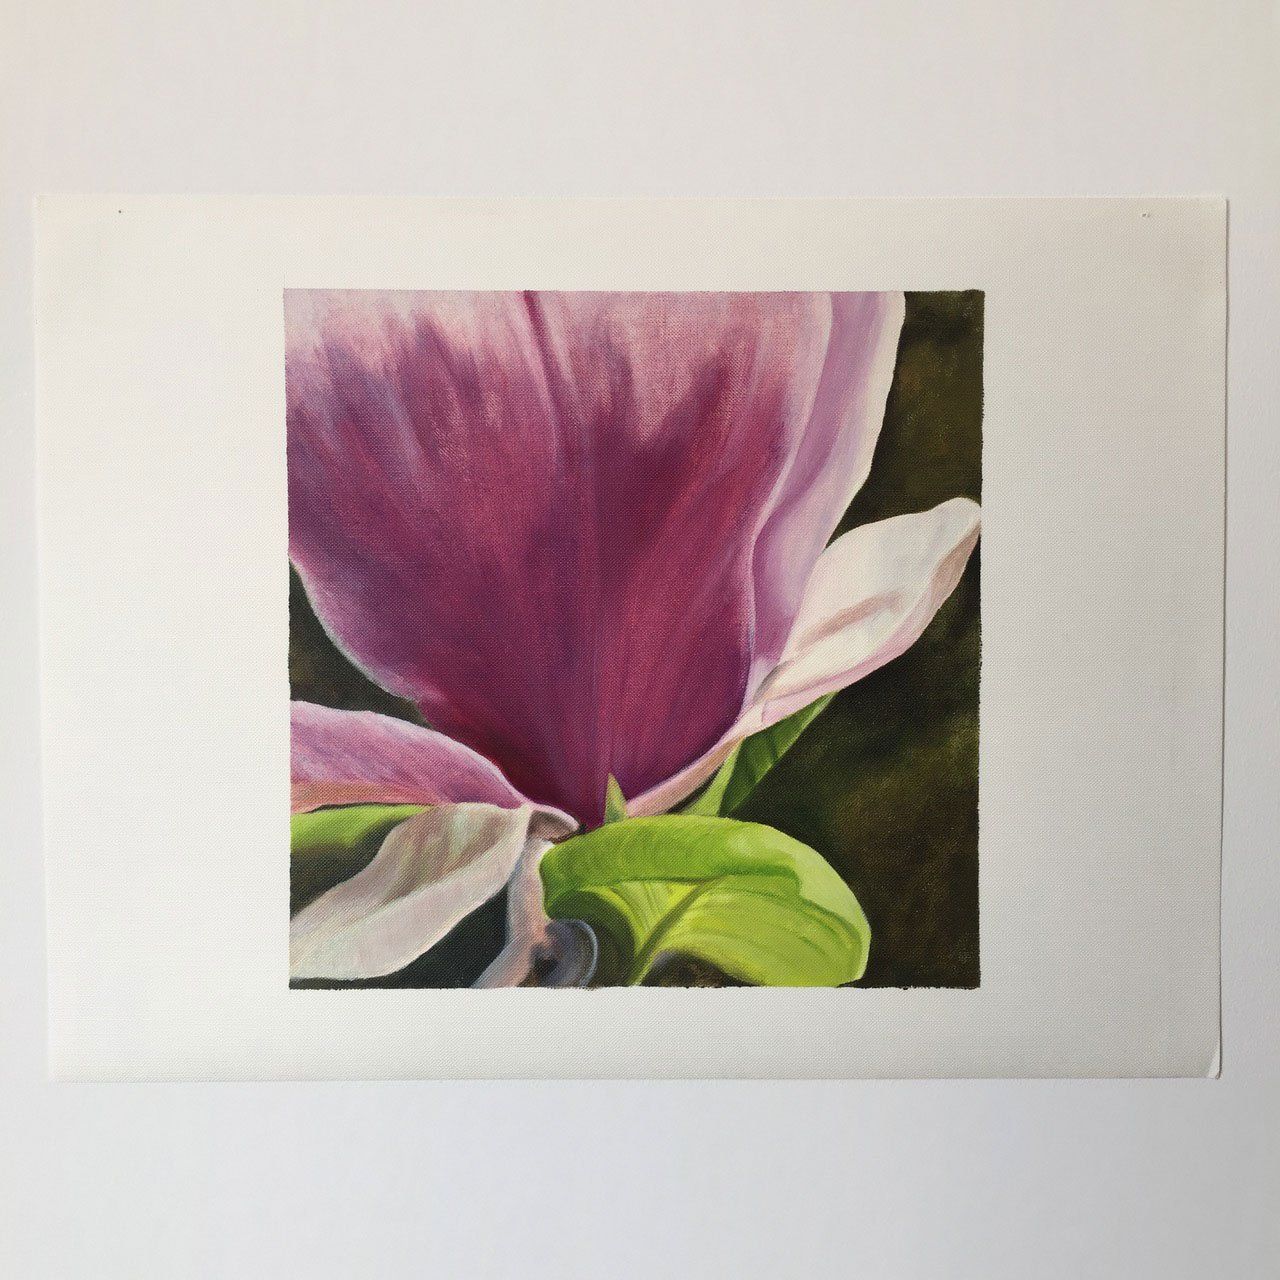 Magnolia Study II, 2016, Oil on canvas , painting by Sarah Wood